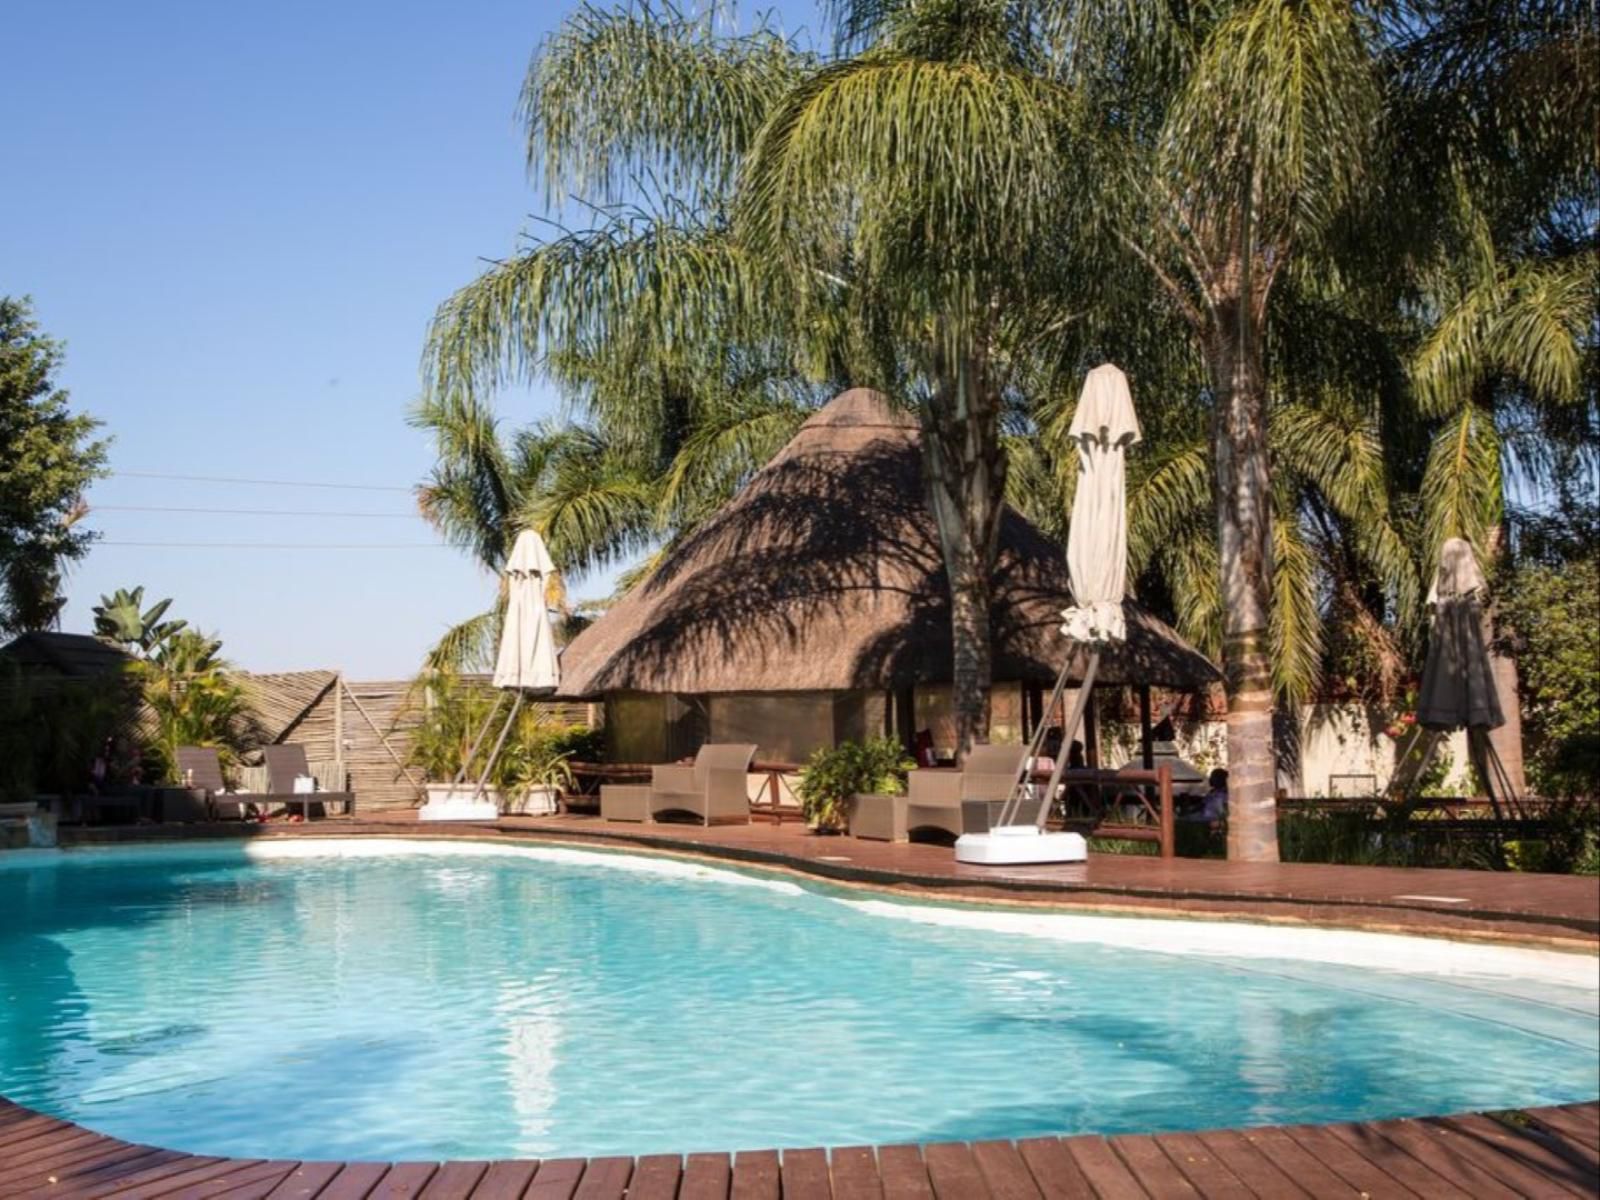 2Ten Hotel Thohoyandou Limpopo Province South Africa Complementary Colors, Palm Tree, Plant, Nature, Wood, Swimming Pool